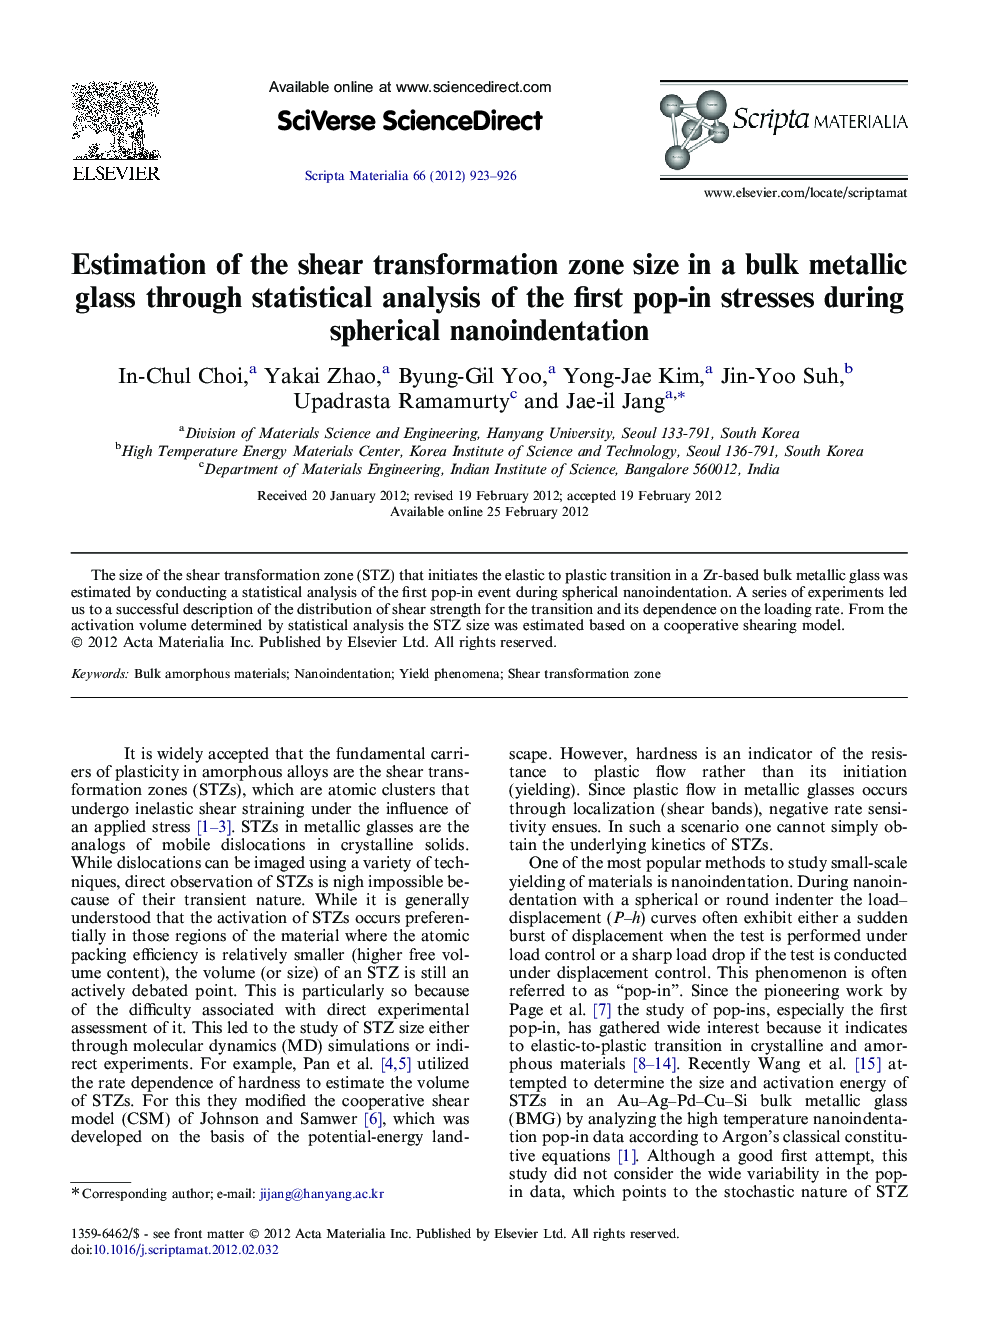 Estimation of the shear transformation zone size in a bulk metallic glass through statistical analysis of the first pop-in stresses during spherical nanoindentation